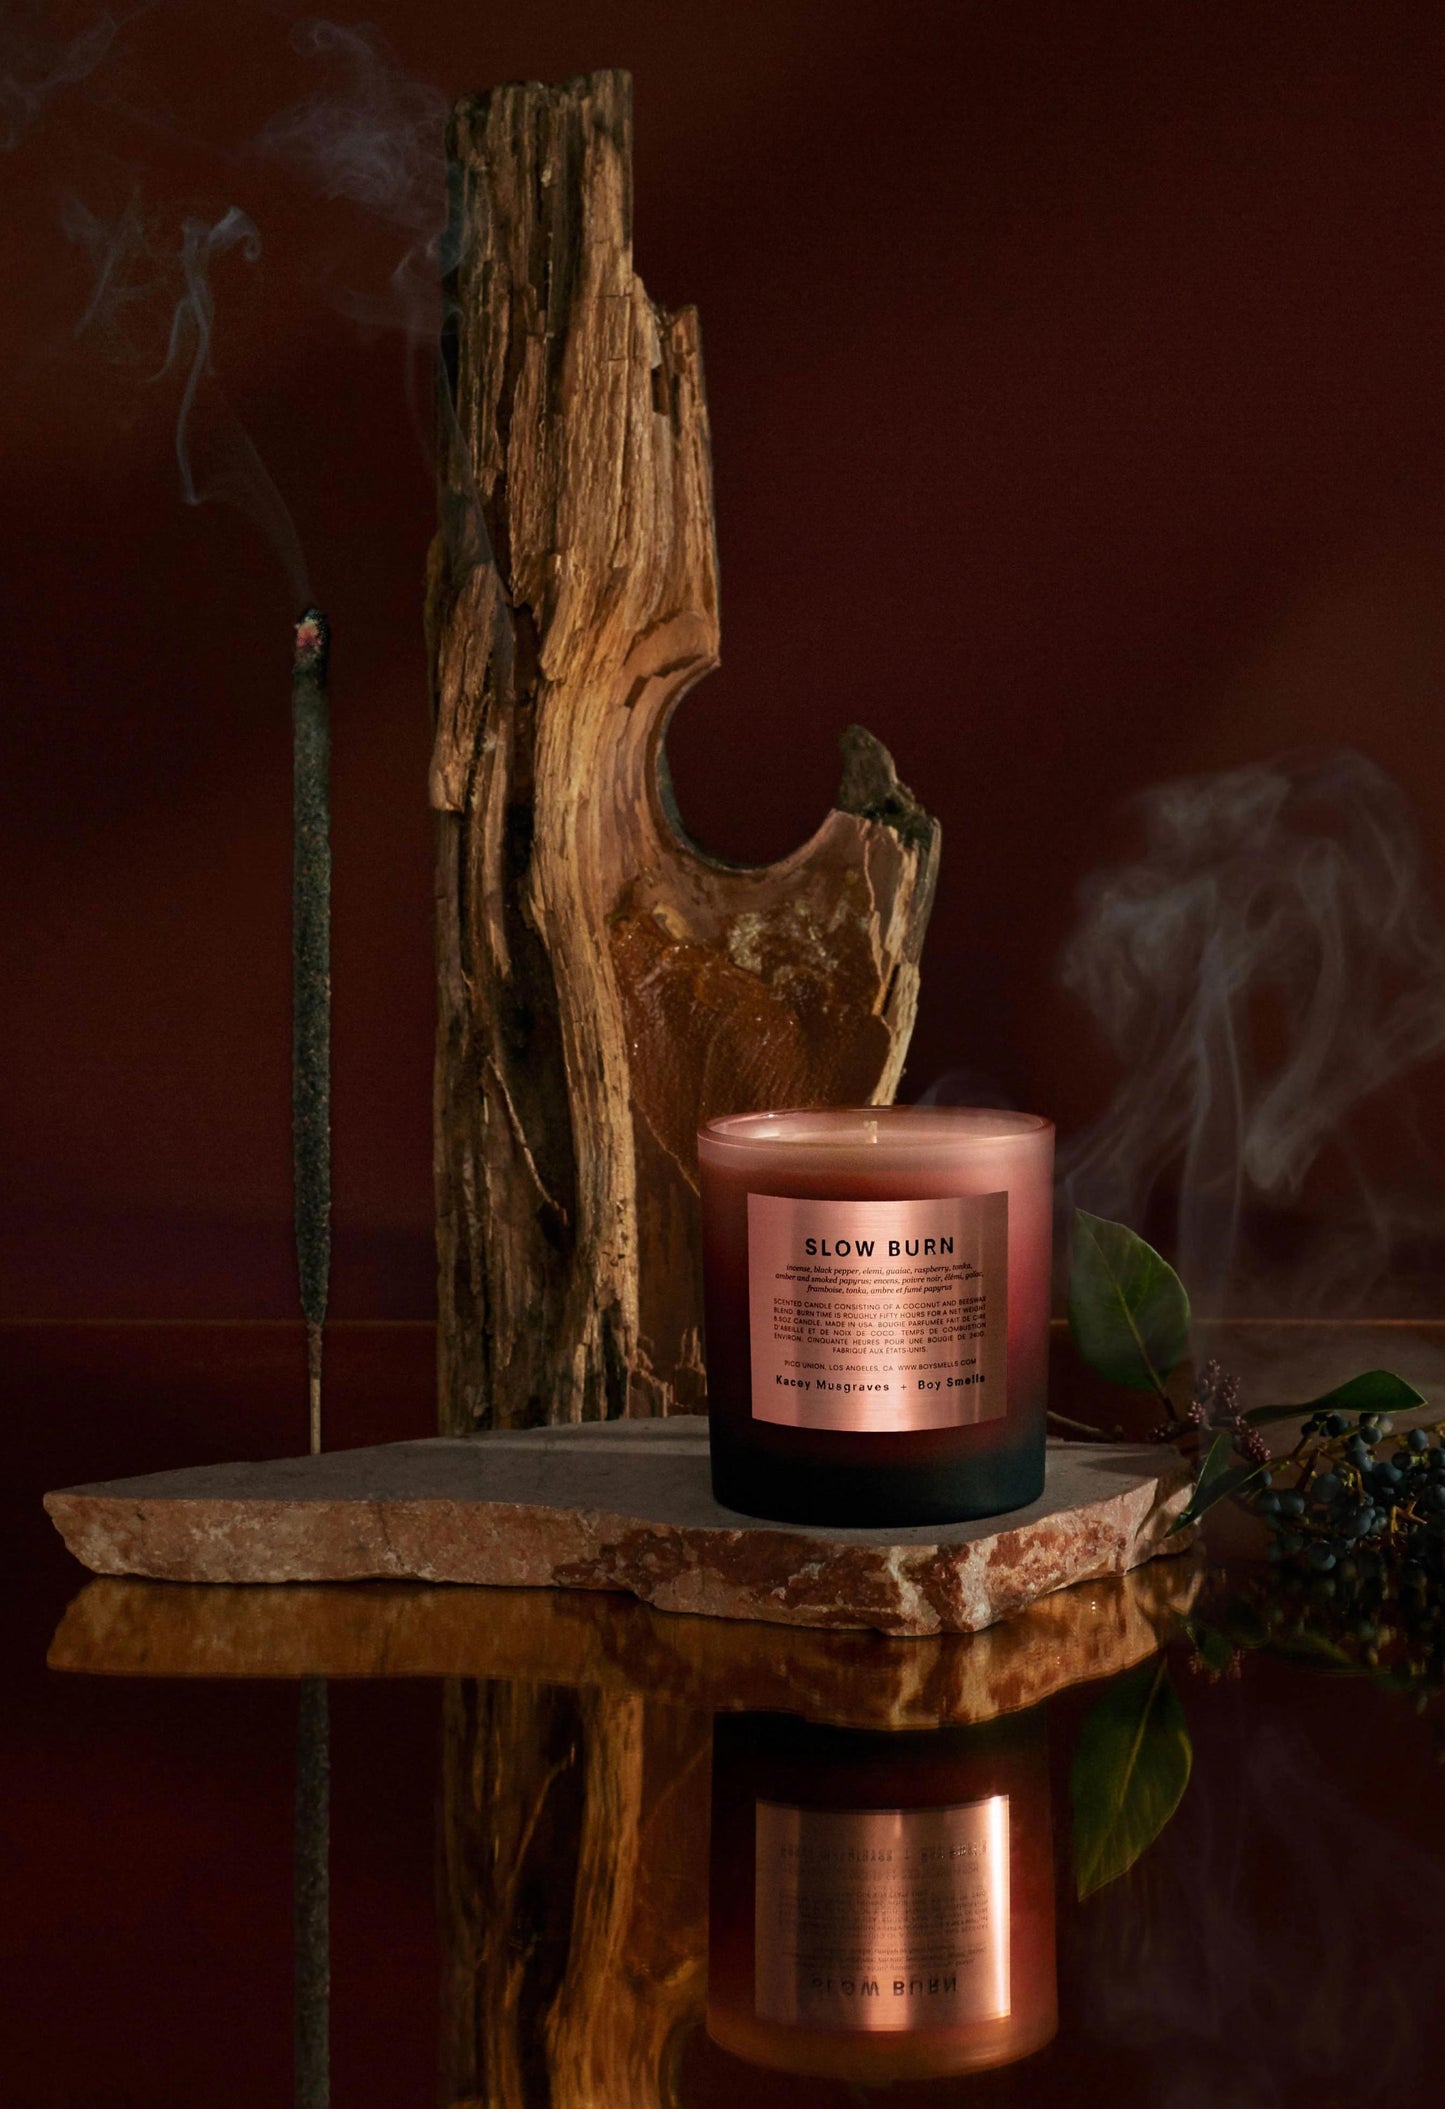 Limited Edition Slow Burn 8.5 Oz Candle